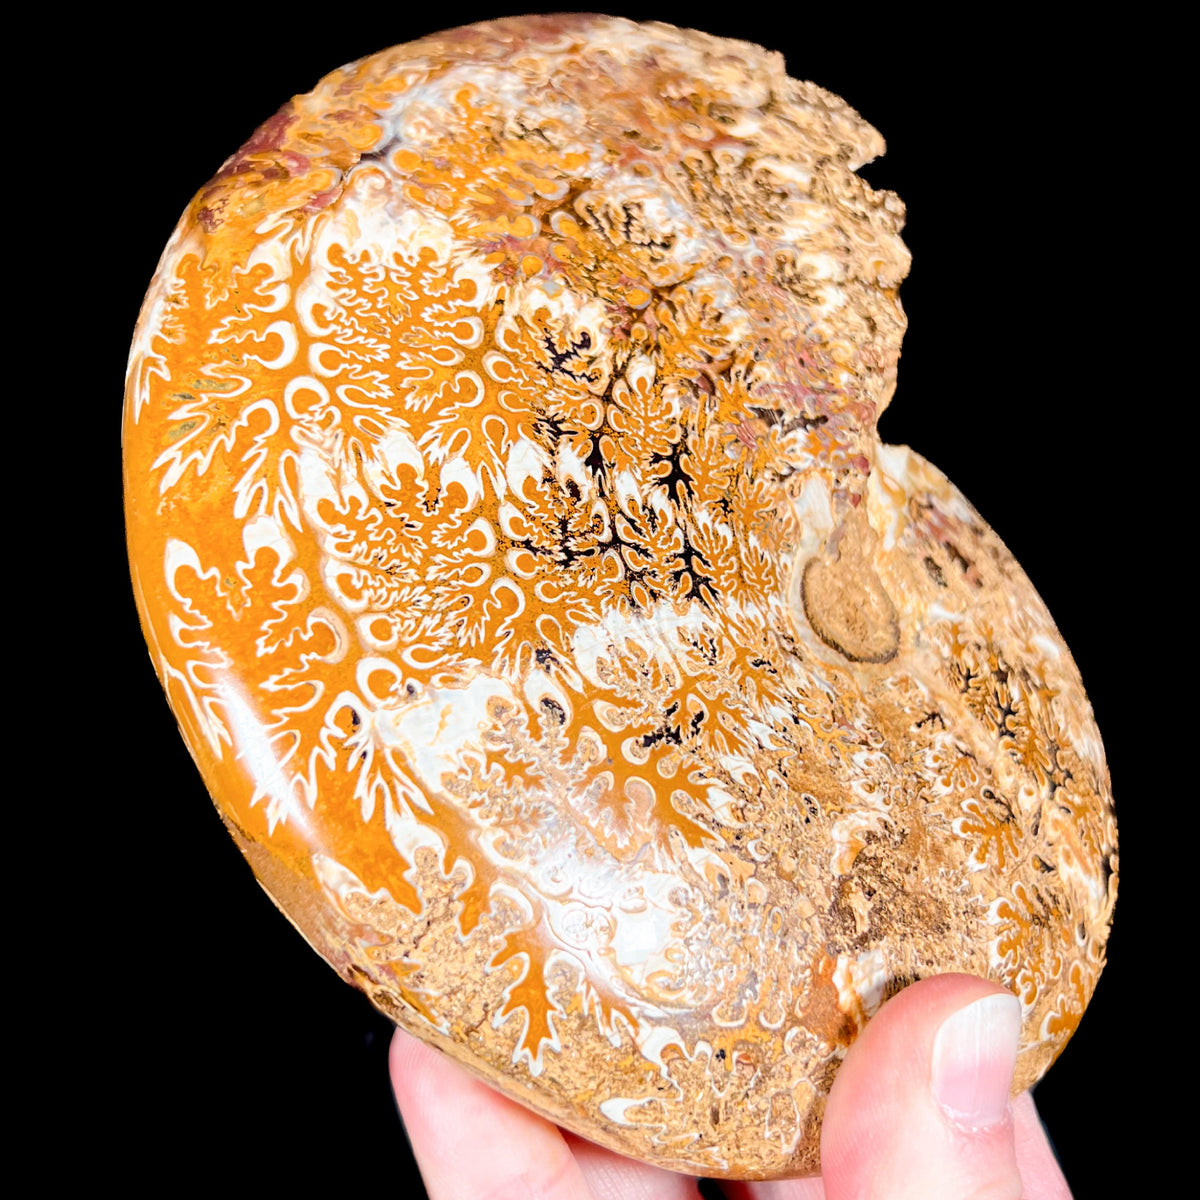 Suture Markings on a Phylloceras Ammonite Shell